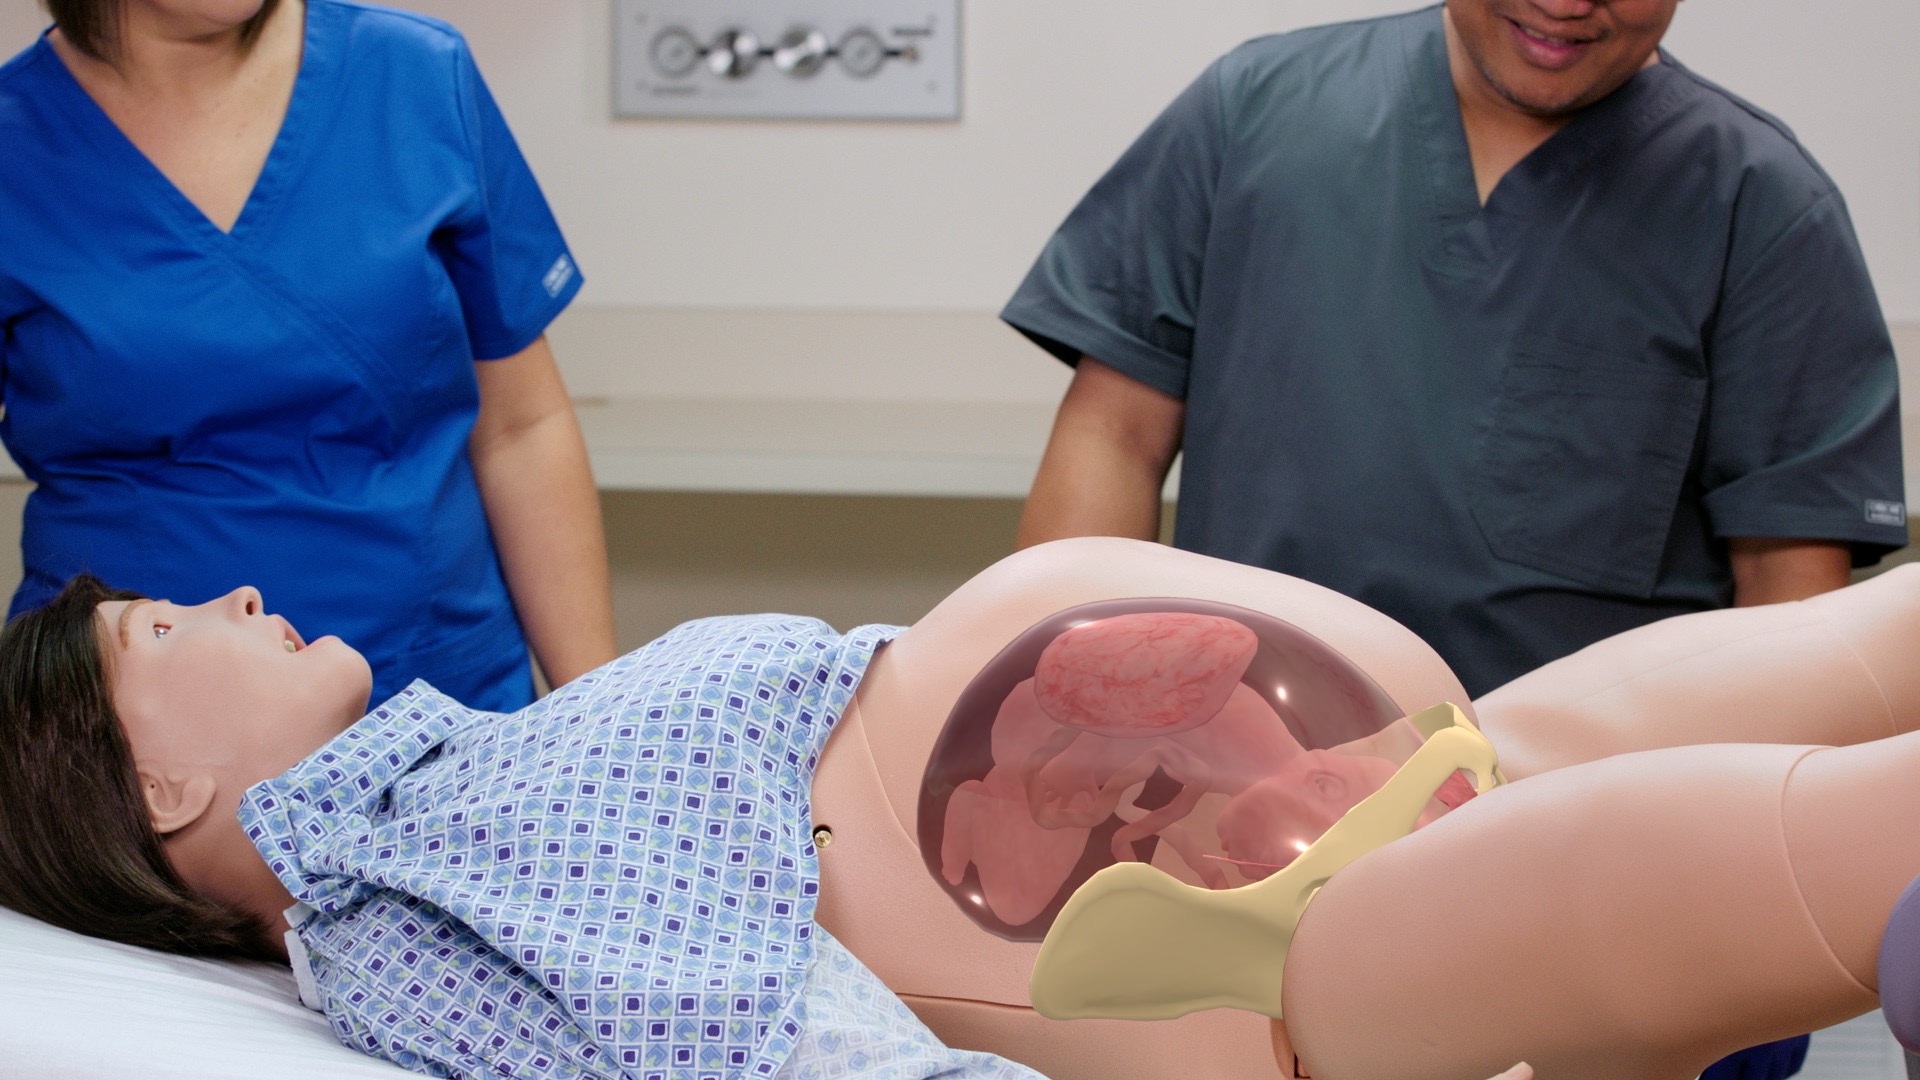 LucinaAR – The First Childbirth Simulator Built on Augmented Reality Technology Launched by CAE Healthcare